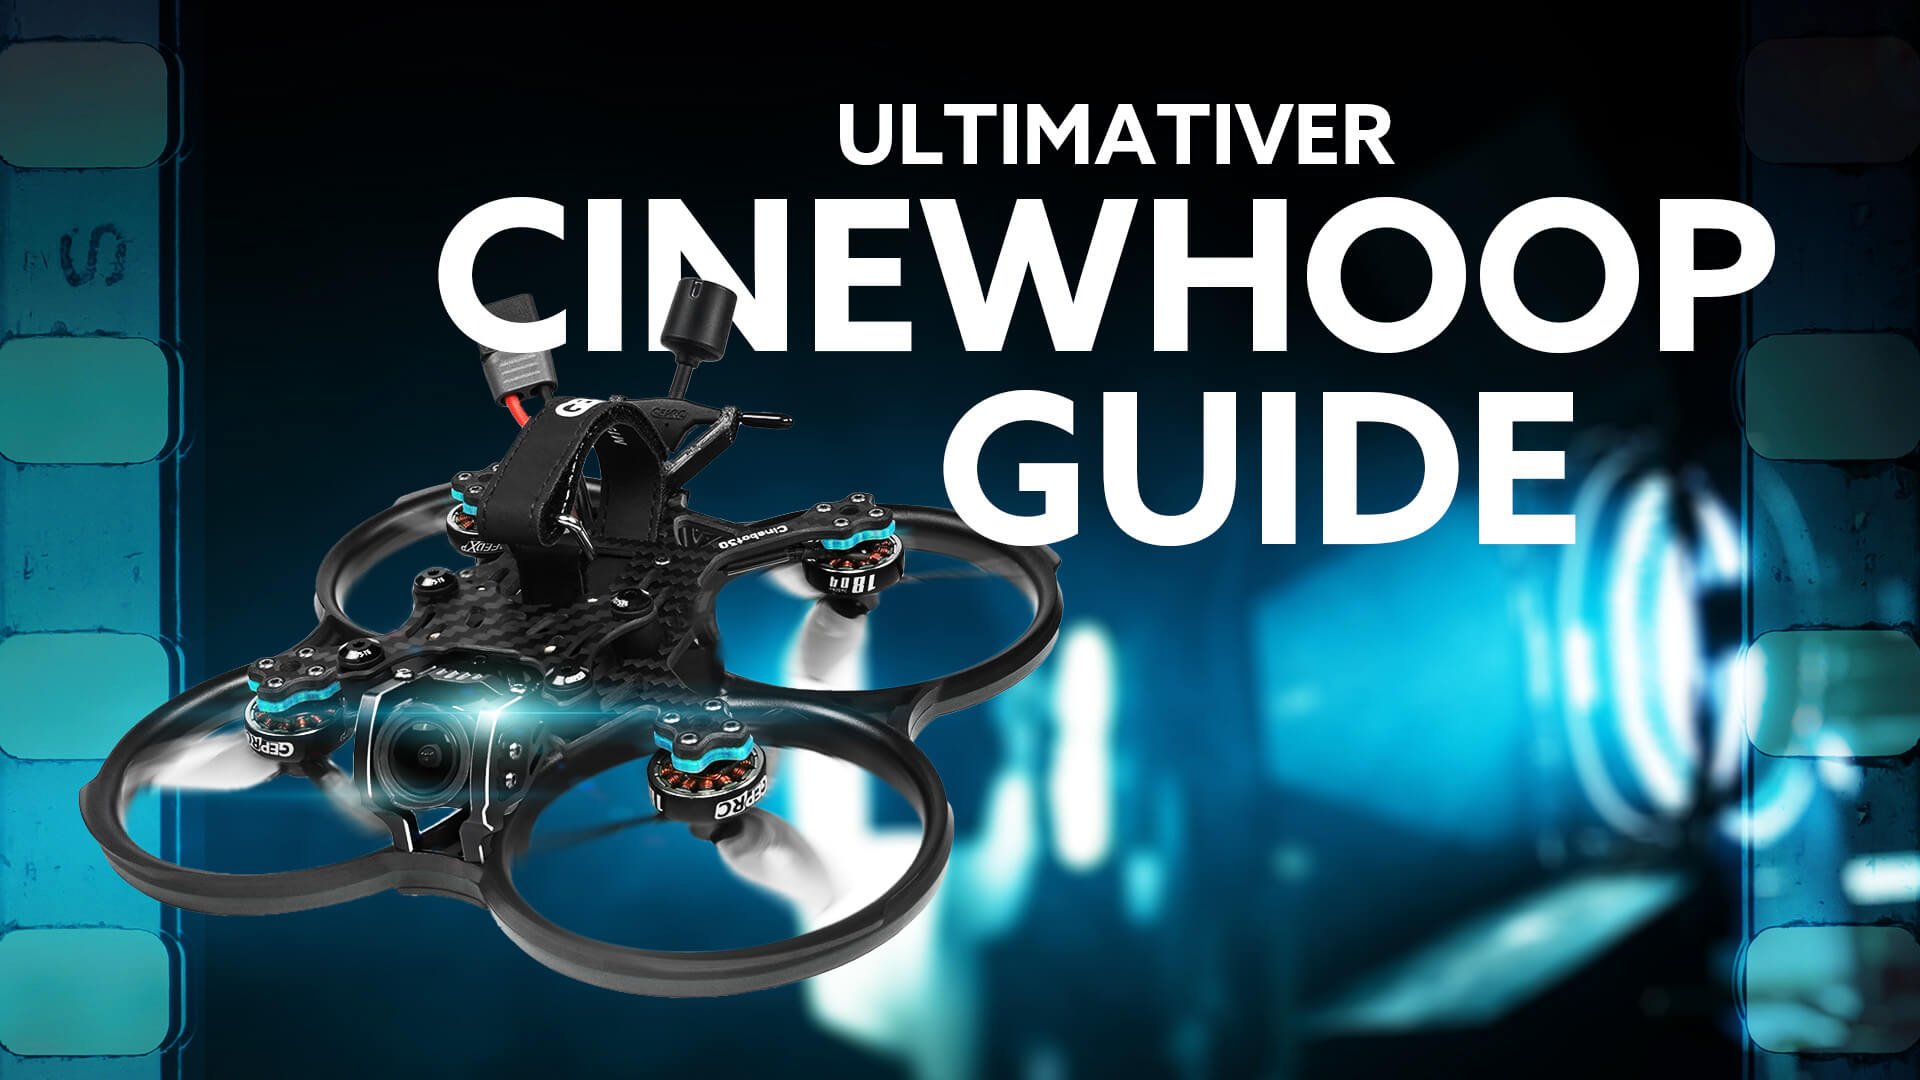 FPV Cinewhoops: Der ULTIMATIVE Guide